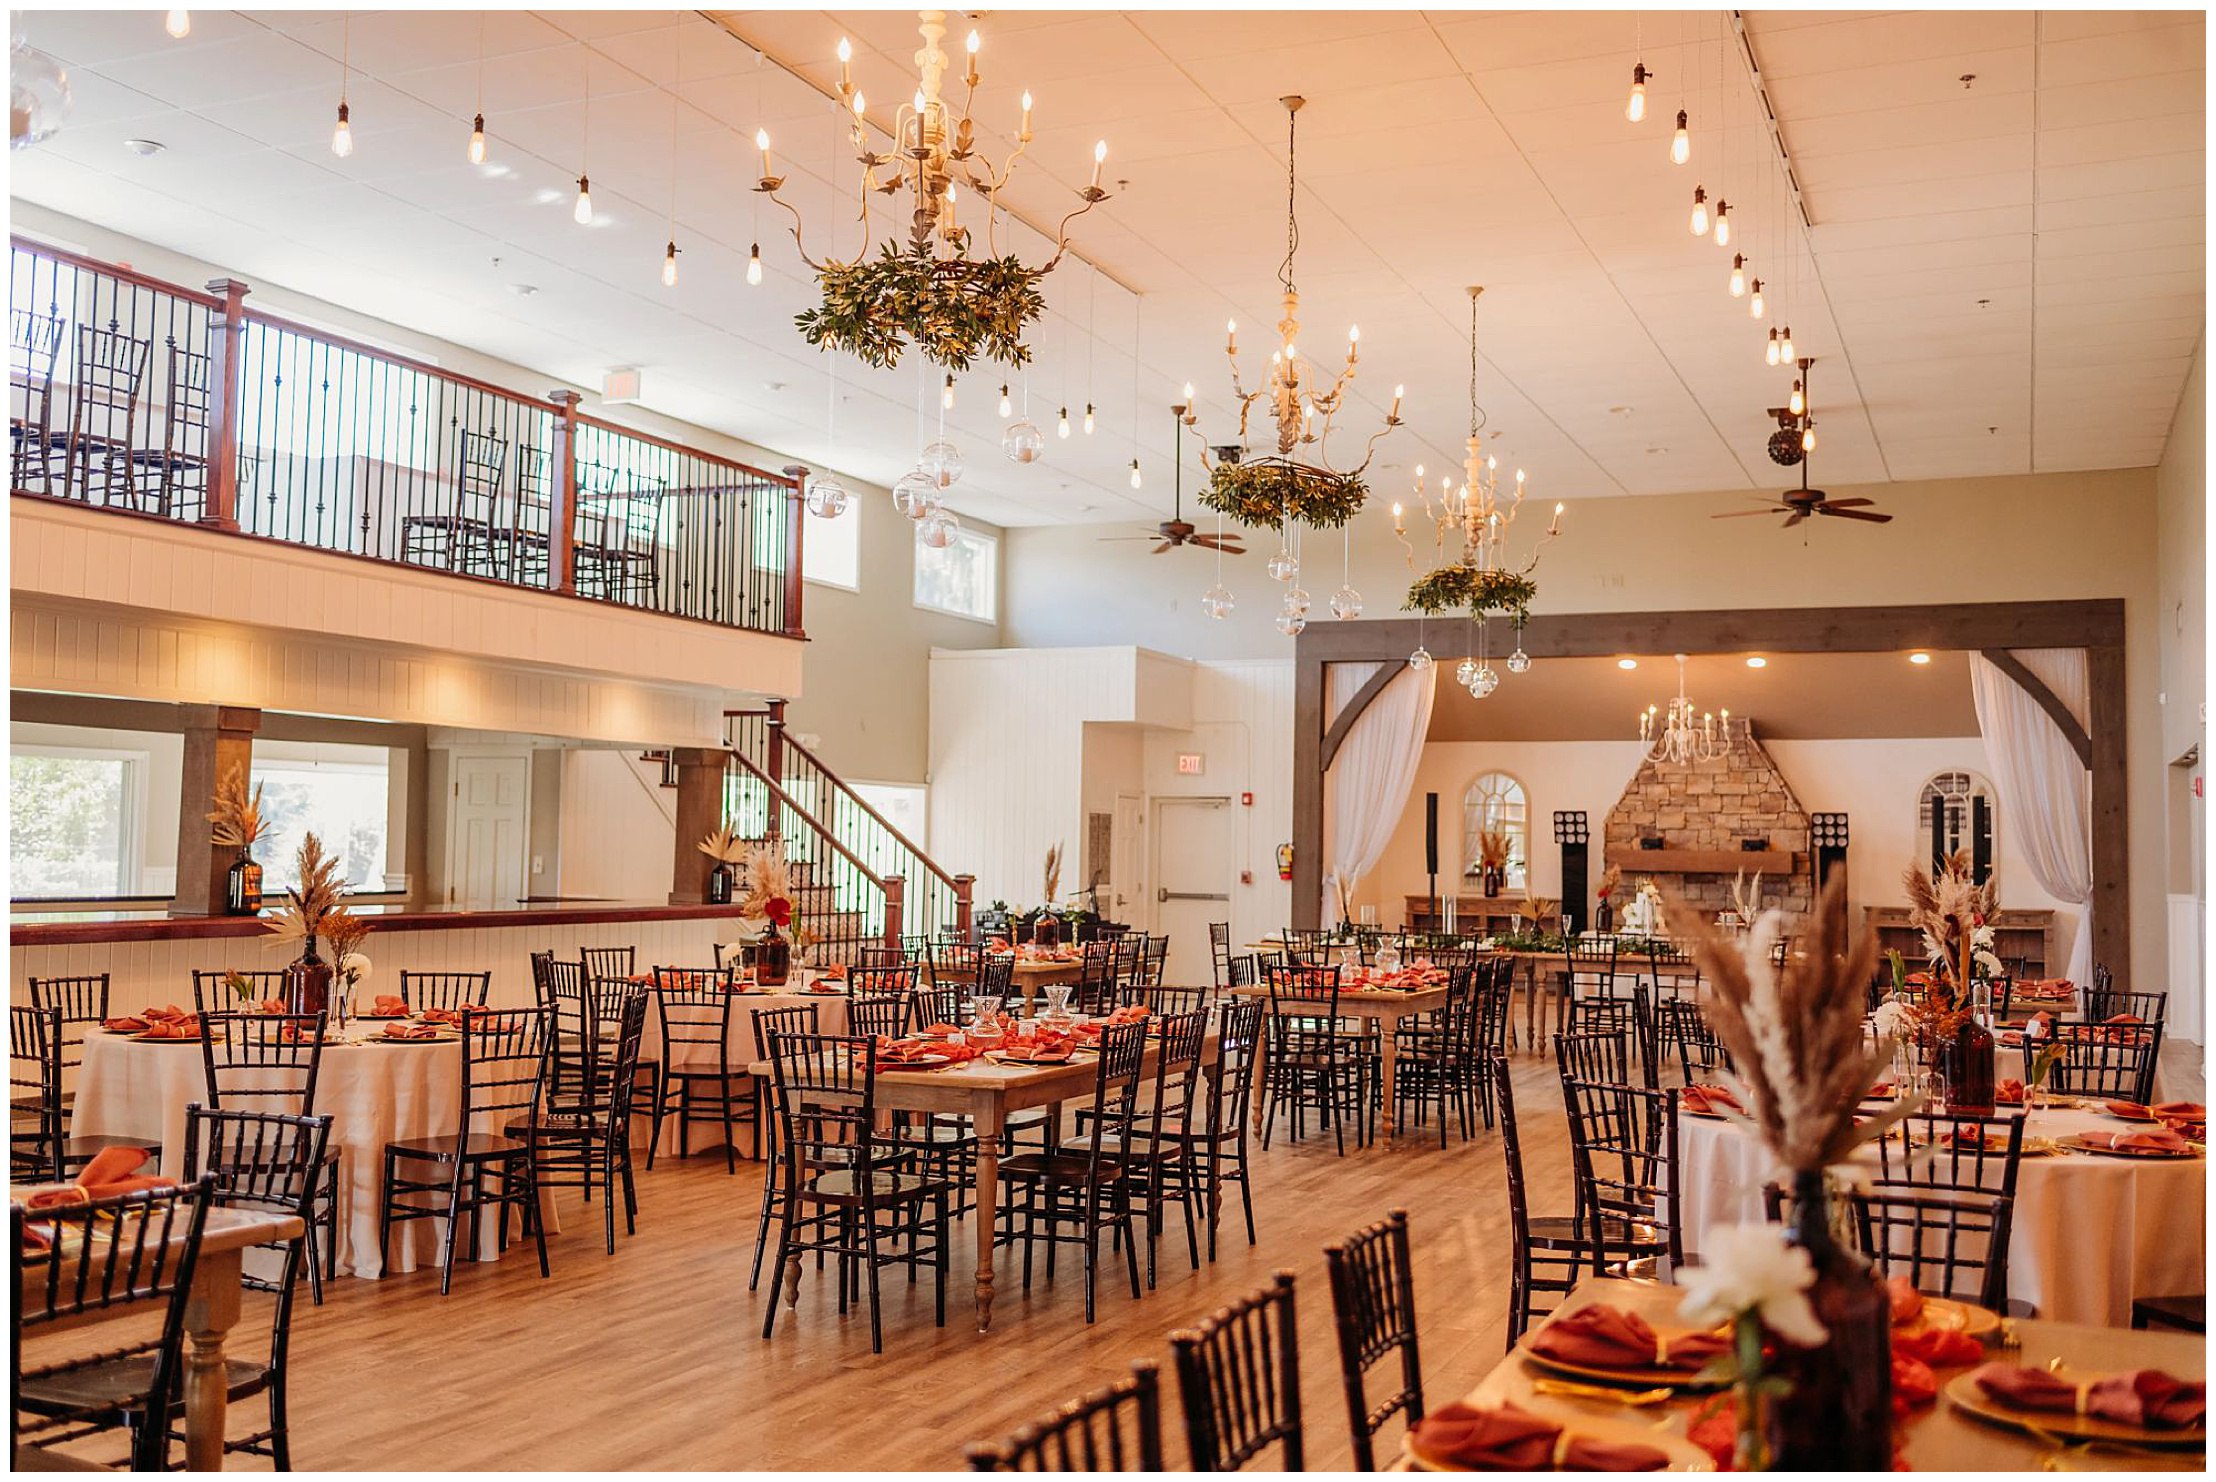 photo of indoors The Venue Chattanooga with wooden tables and chairs, maroon linen napkins, and boho decor